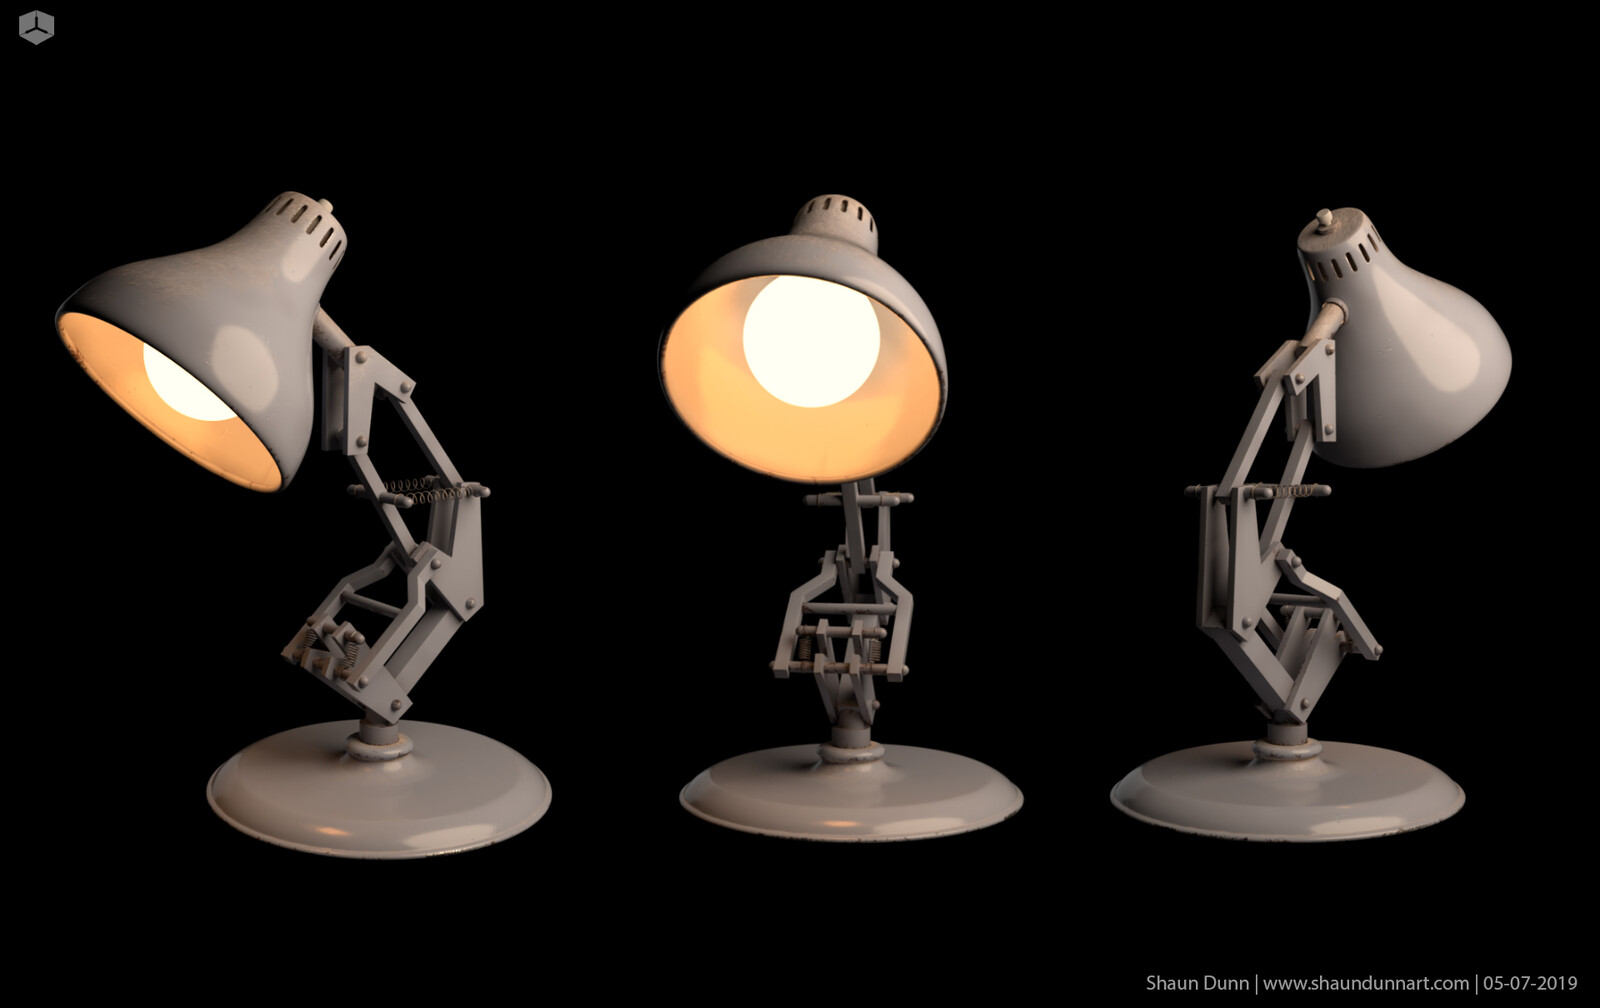 Luxo Jr textured with some fun lighting.